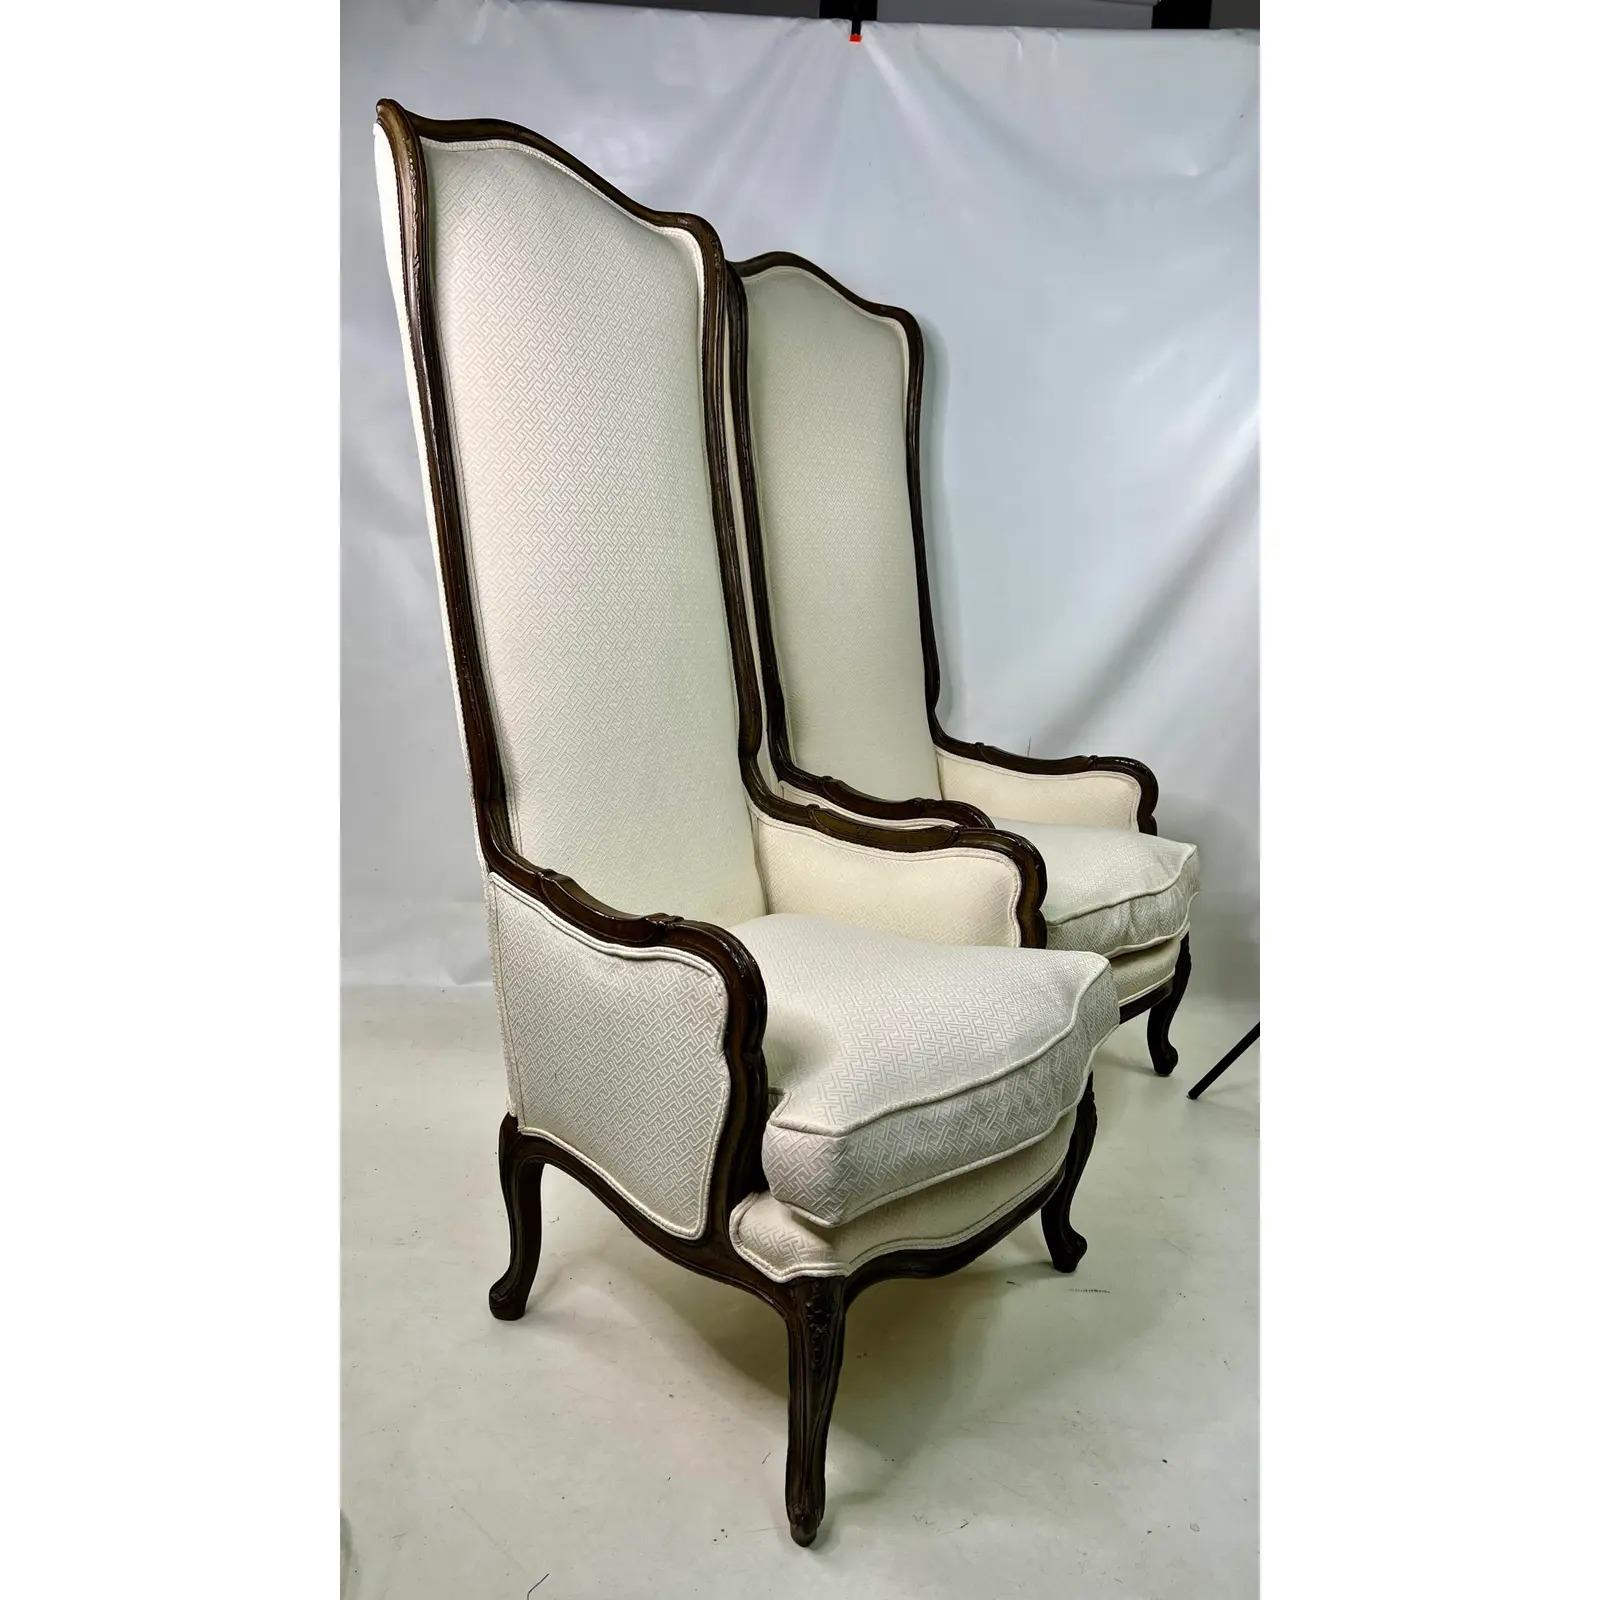 Vintage French style high back throne chairs - a pair.
The chairs are very well made and the cushions are down filled.